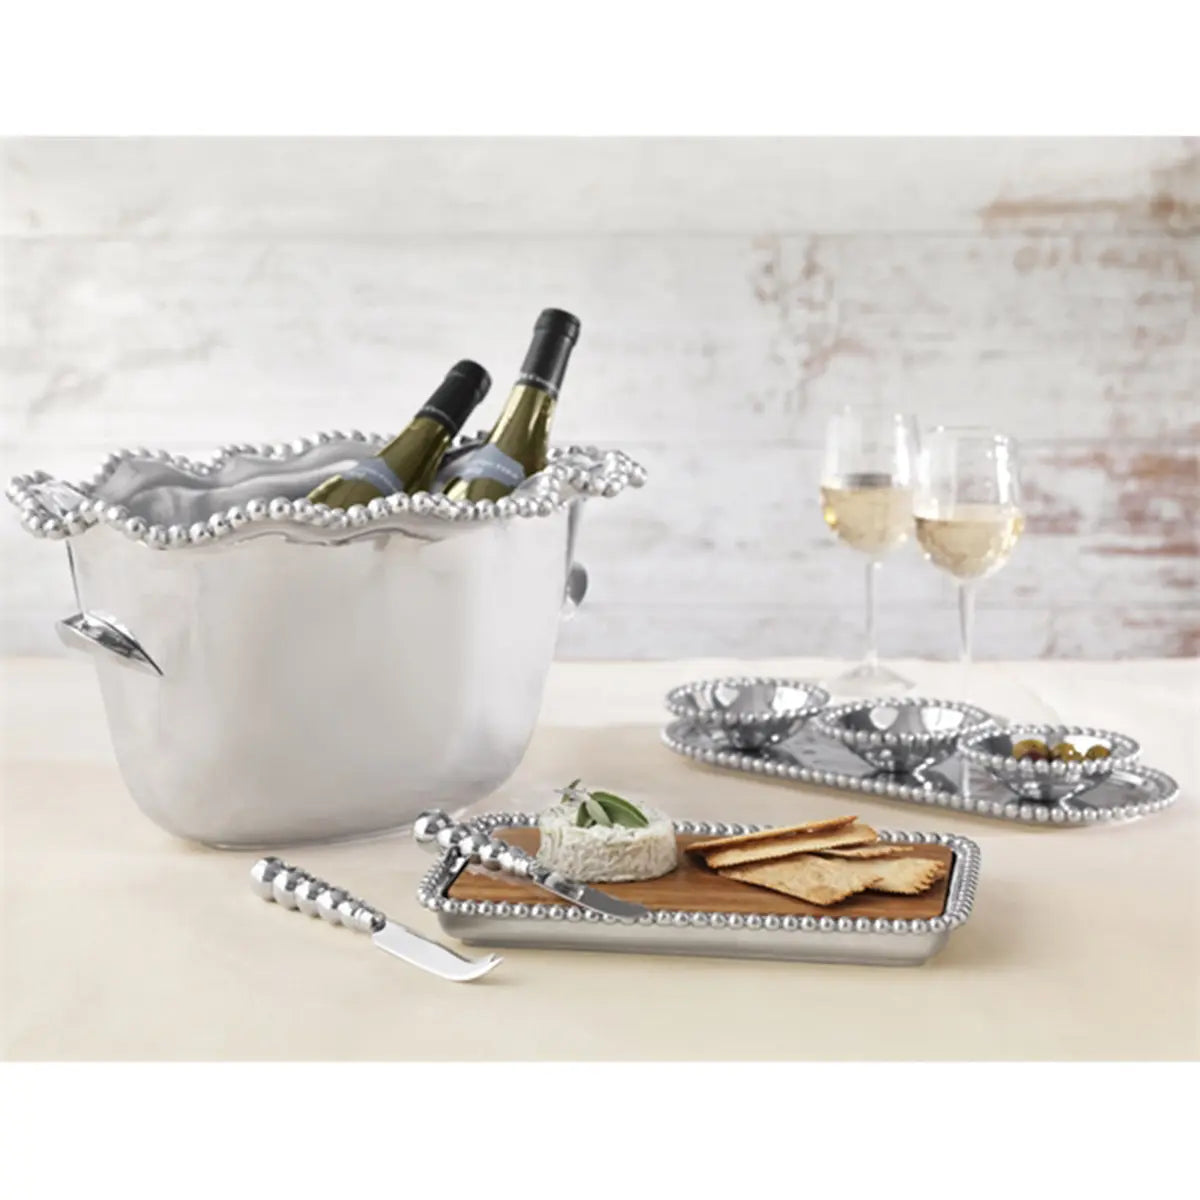 Mariposa Bellini White Wine Glass set on a table with food and ice bucket with white wine